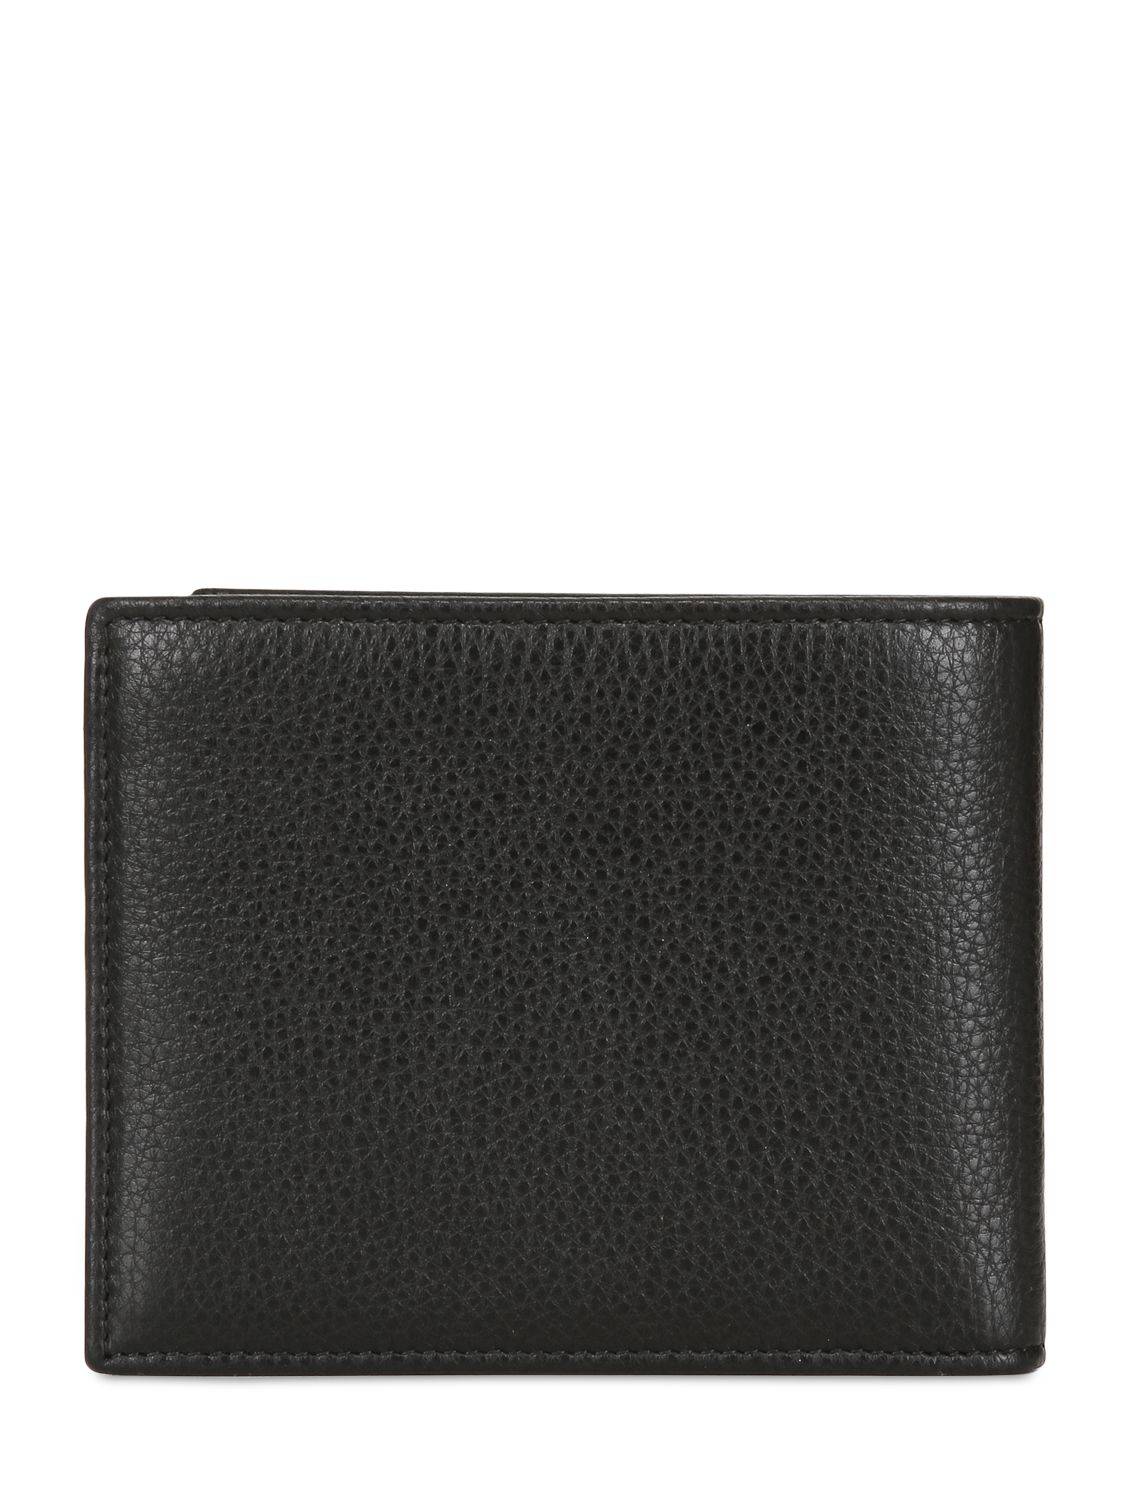 Giorgio armani Embossed Logo Grained Leather Wallet in Black for Men | Lyst